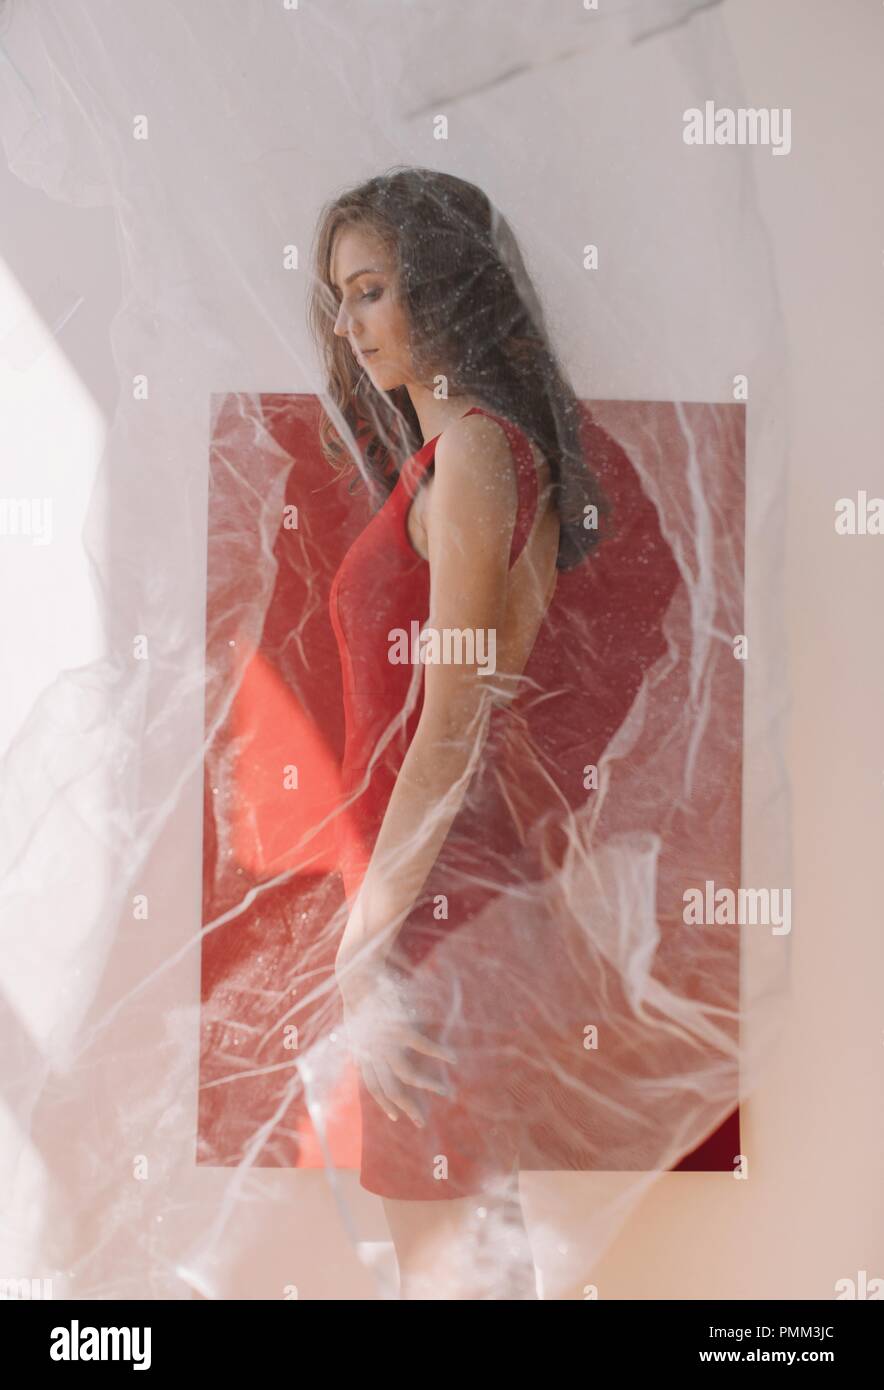 Portrait of a woman standing by a red wall behind a veil Stock Photo